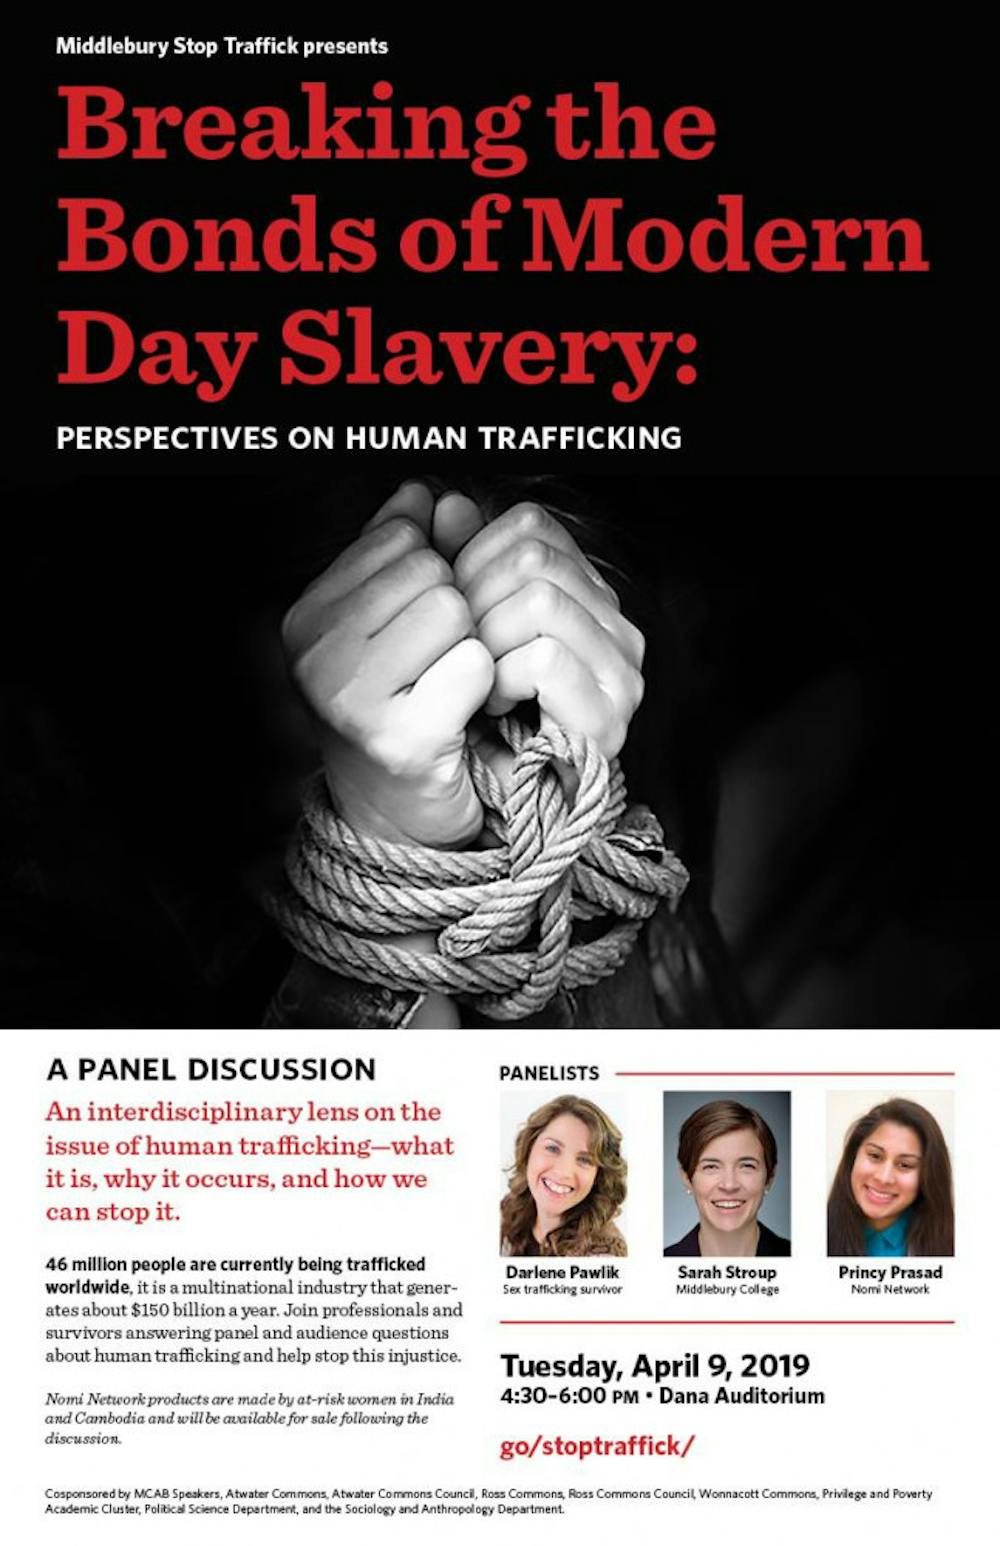 <span class="photocreditinline">COURTESY PHOTO</span><br />Middlebury Stop Traffick is a social justice-oriented student organization that aims to combat sex trafficking and modern day slavery.